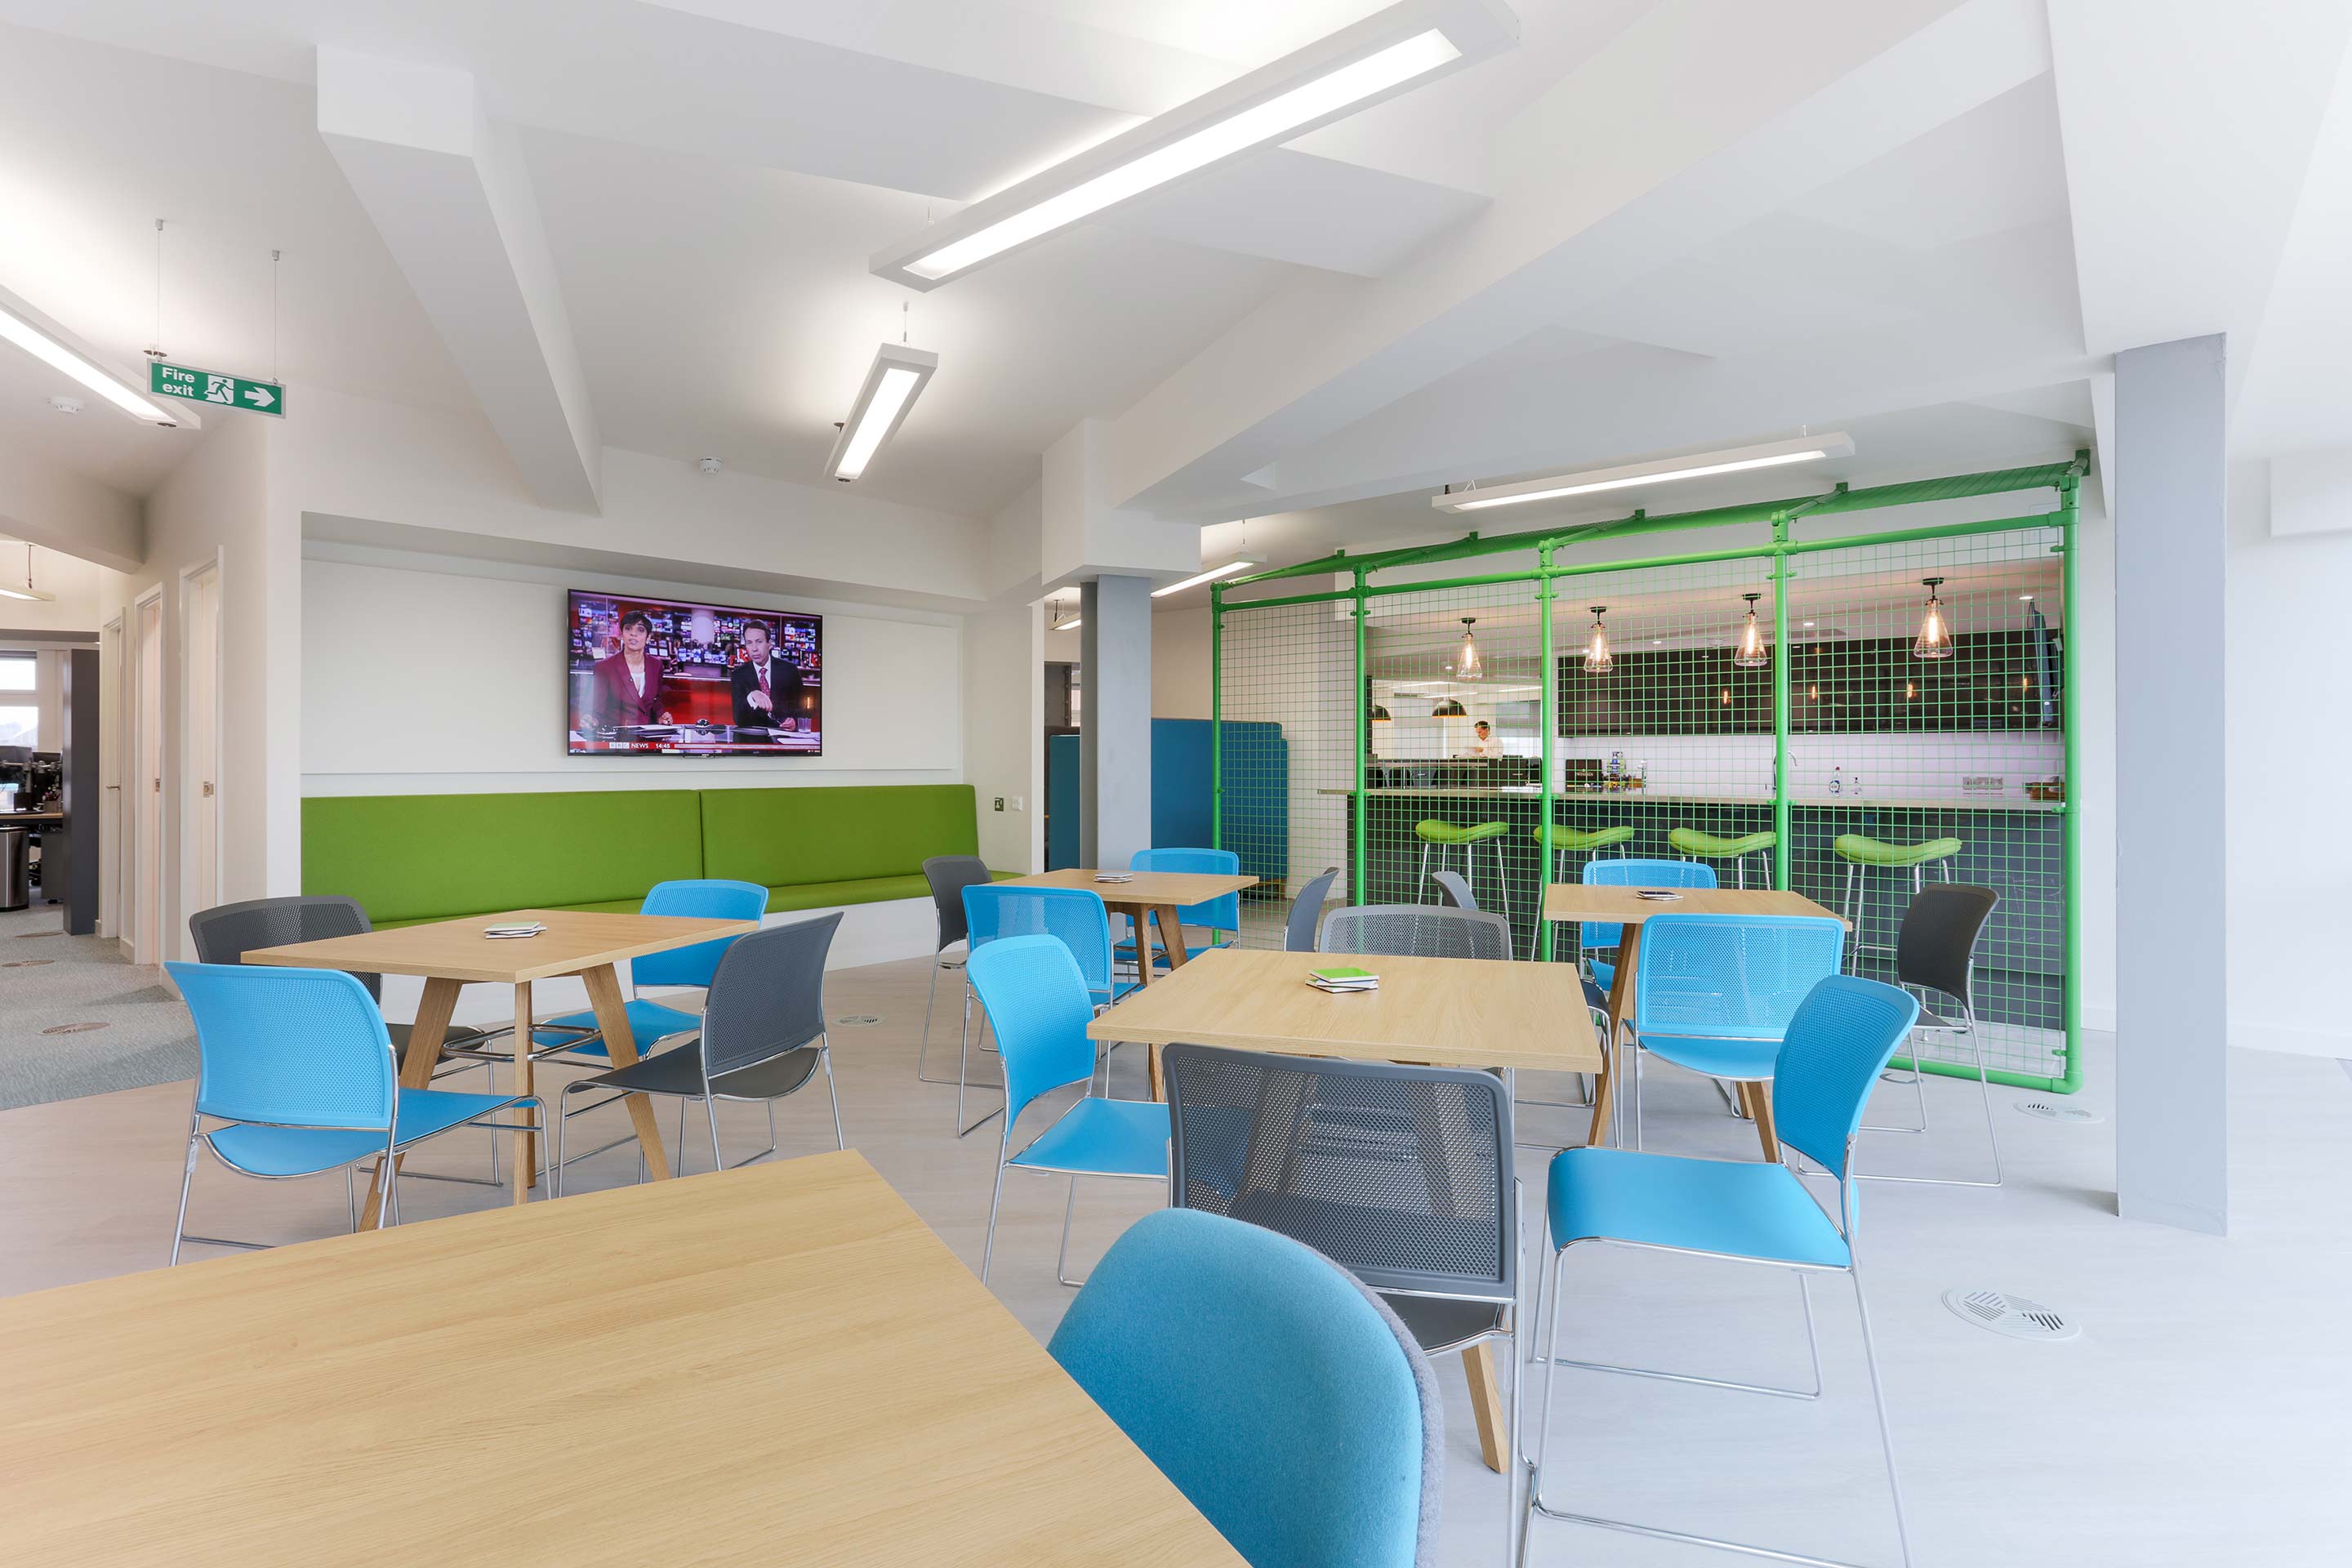 Cafe style seating in FDF's new kitchen and social space